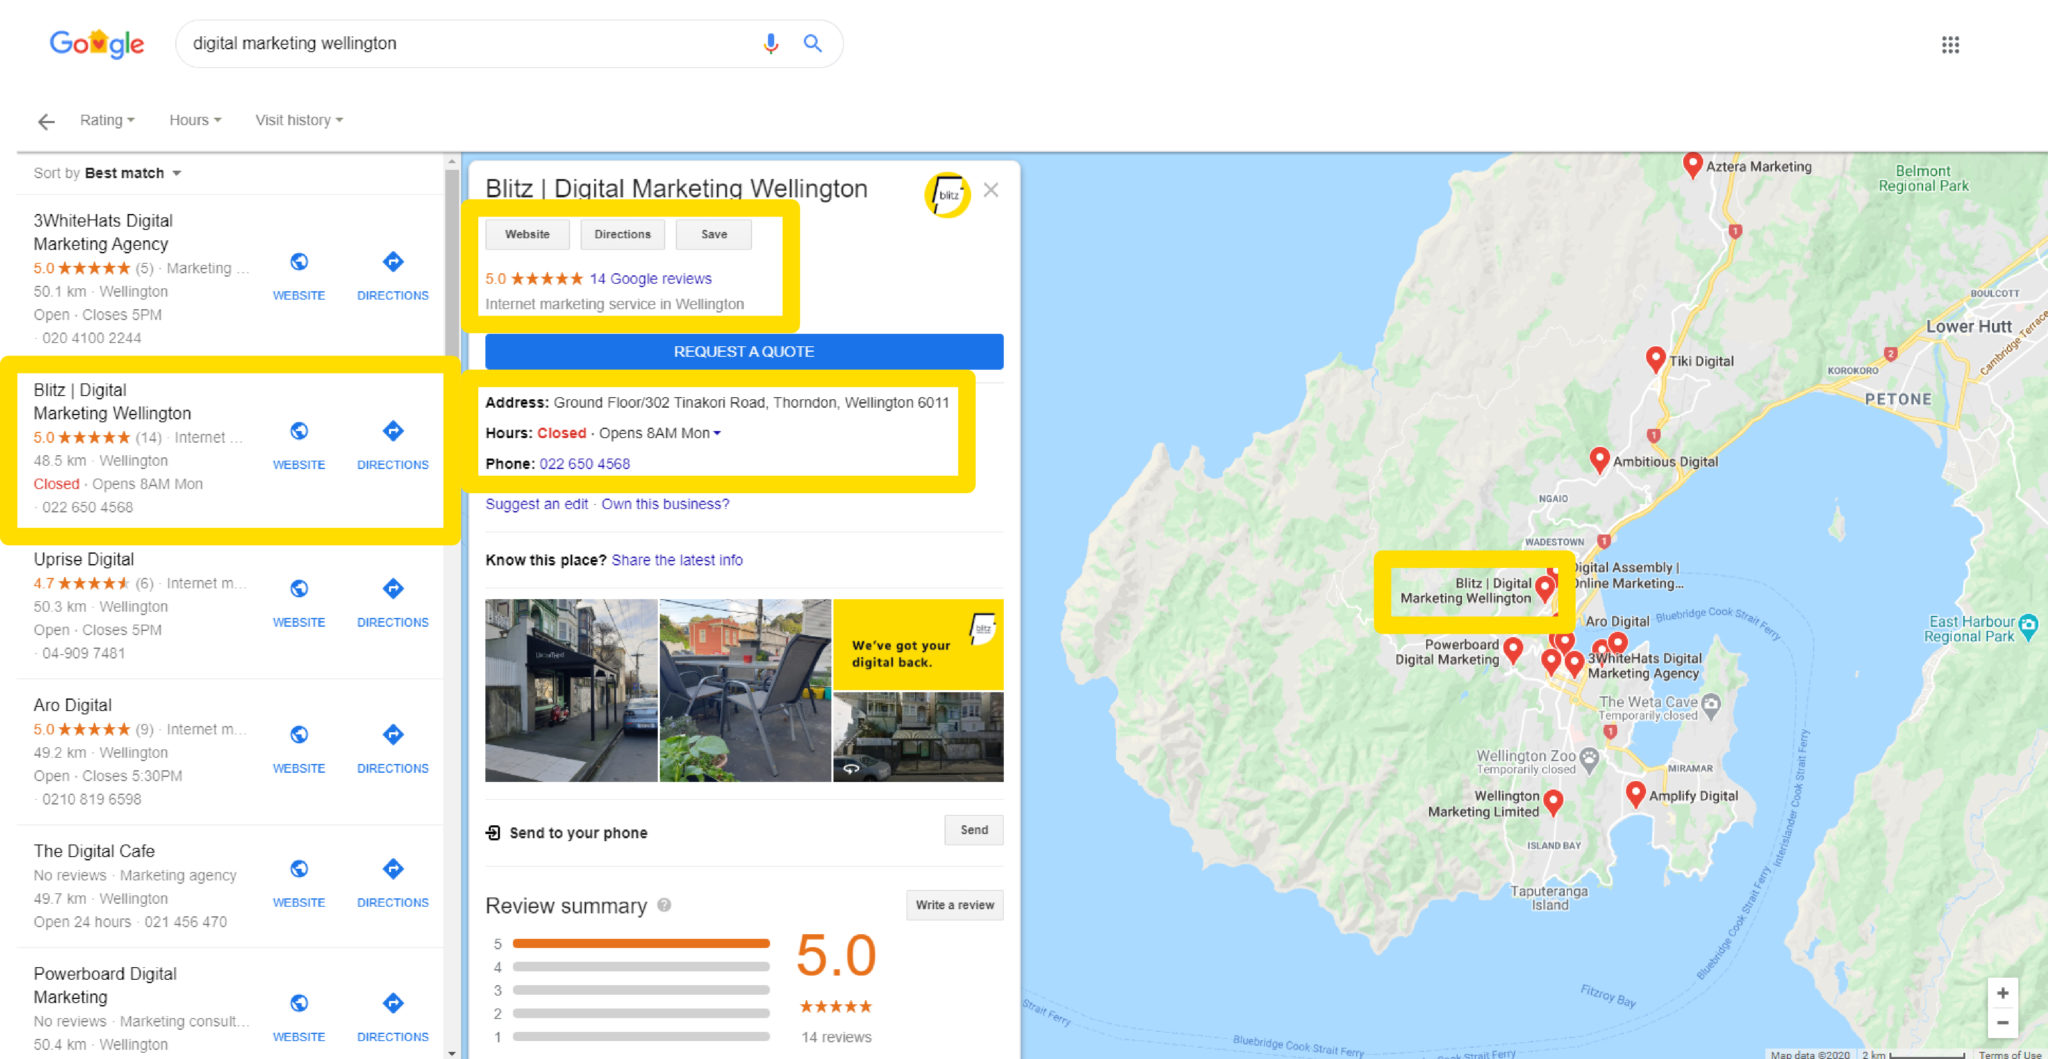 Overview of results related to digital marketing wellington in Google